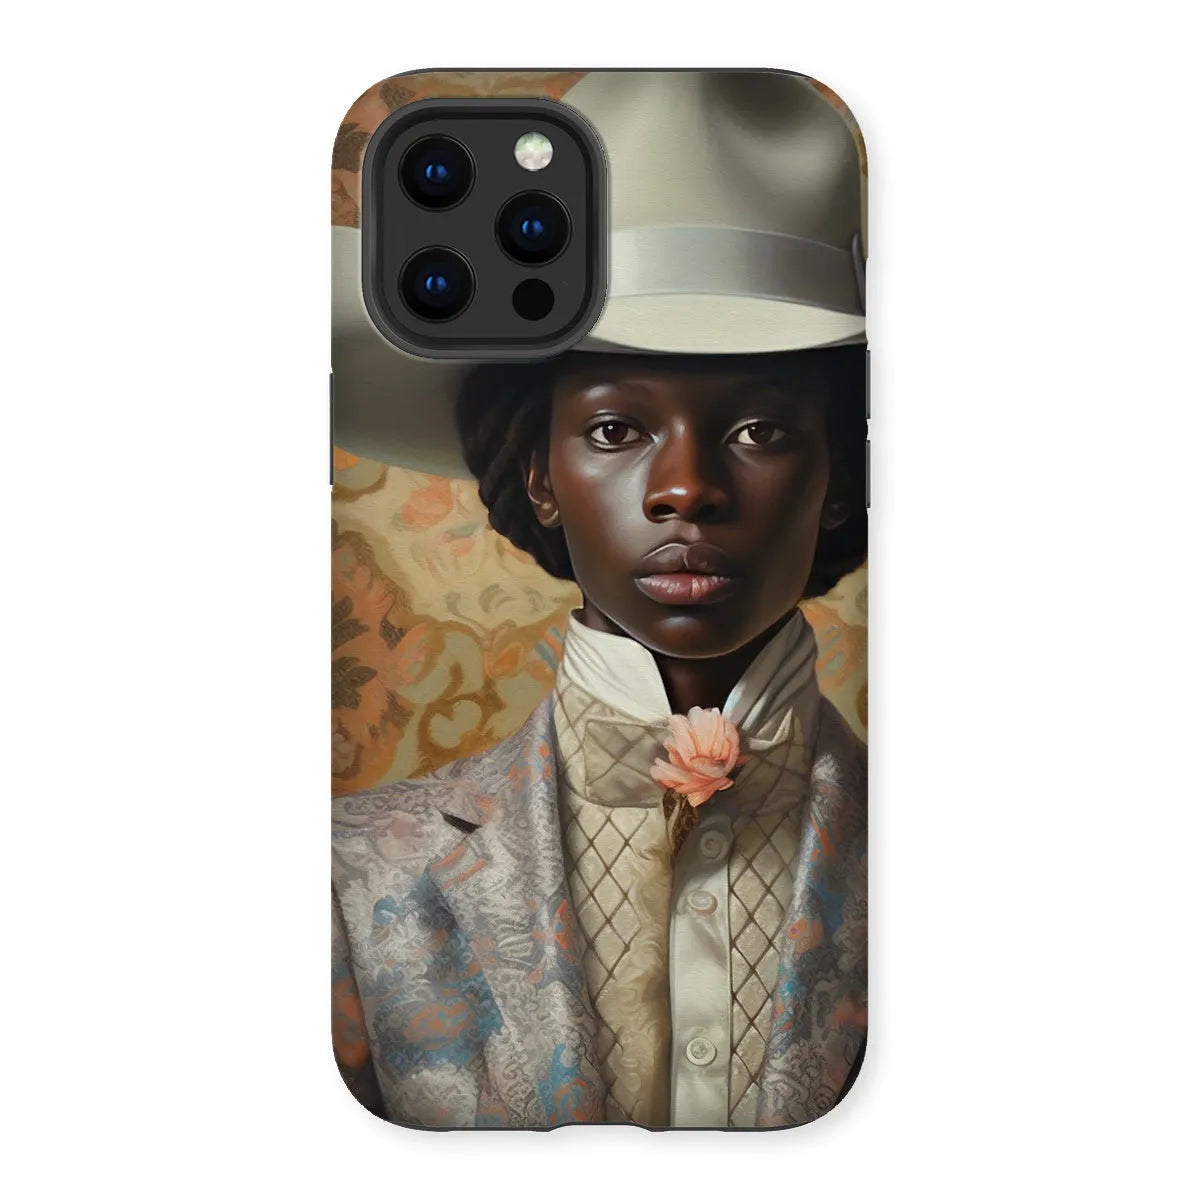 Caesar The Gay Cowboy - Gay Aesthetic Art Phone Case - Iphone 13 Pro Max / Matte - Mobile Phone Cases - Aesthetic Art